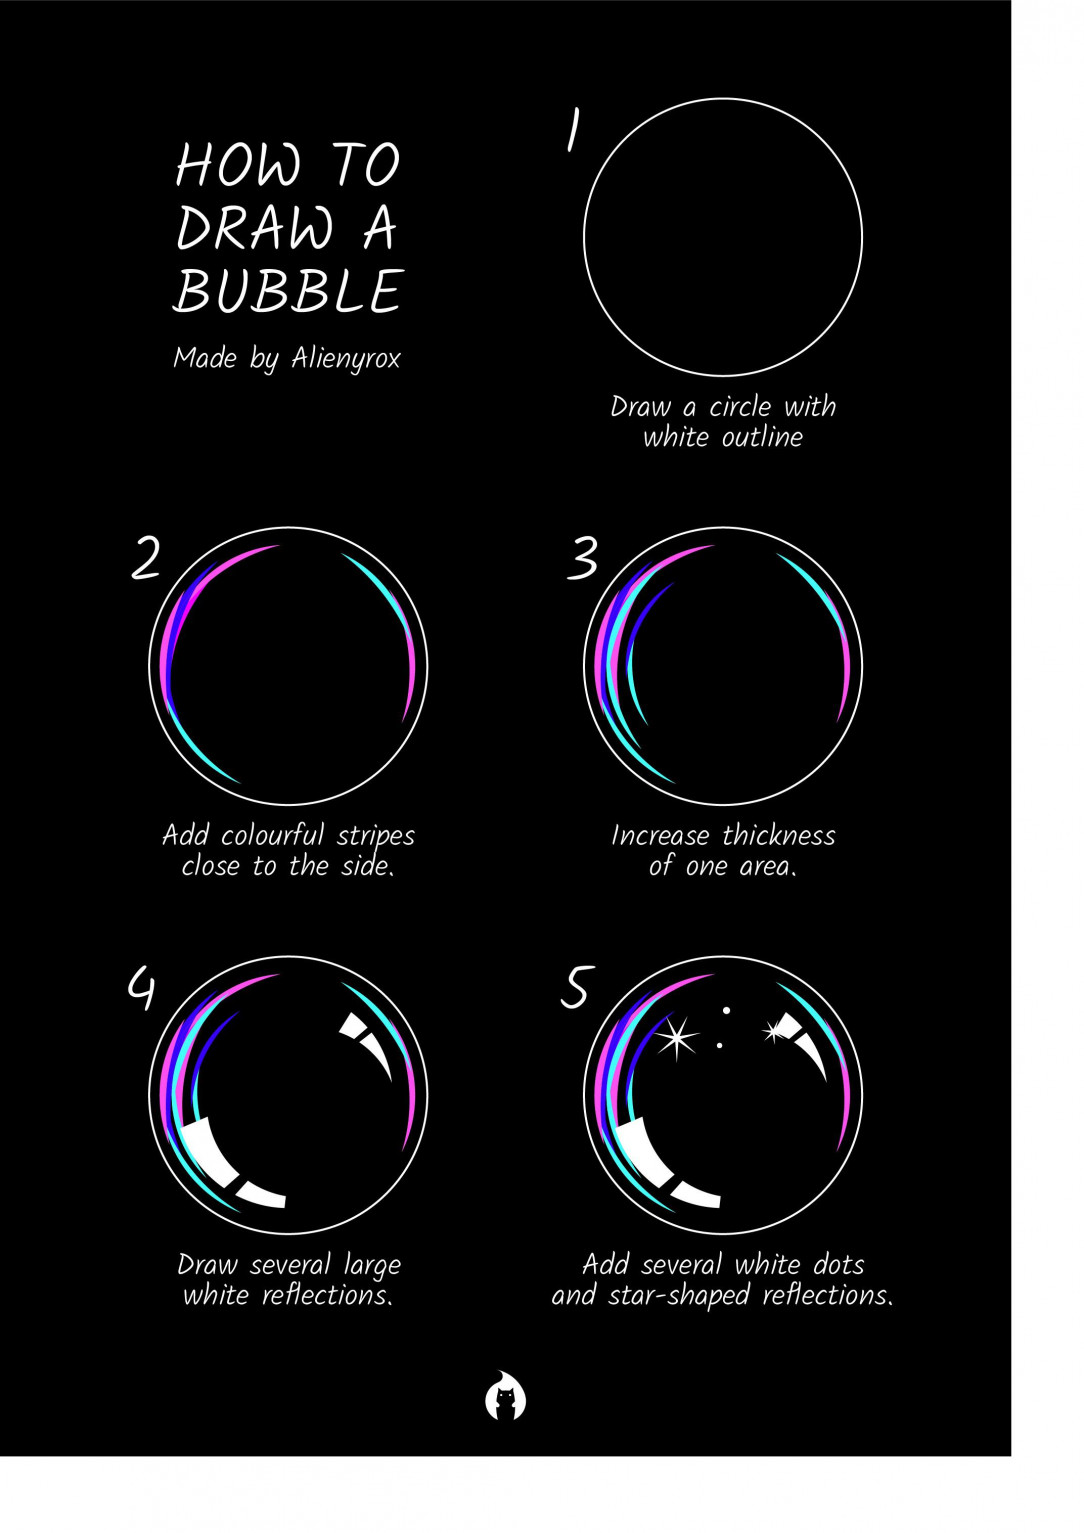 How to draw a bubble